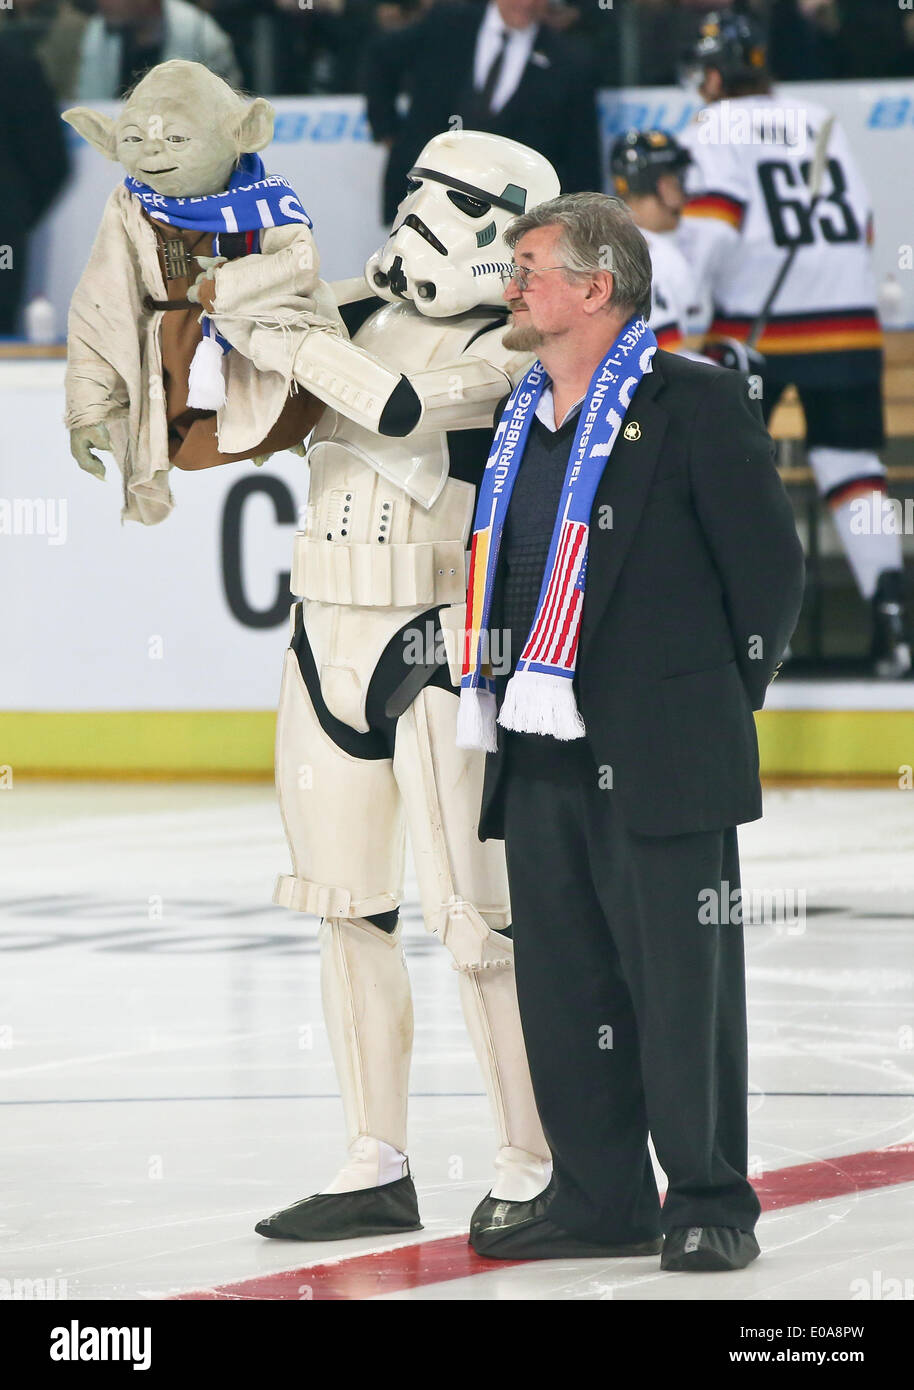 Nuremberg, Germany. 06th May, 2014. A man in a Star Wars Stormtrooper costume who holds up a Yoda Star Wars puppet and the inventor of the Yoda figure Nick Malesy stand on the ice prior to the ice hockey friendly match Germany vs USA in Nuremberg, Germany, 06 May 2014. Photo: DANIEL KARMANN/dpa/Alamy Live News Stock Photo